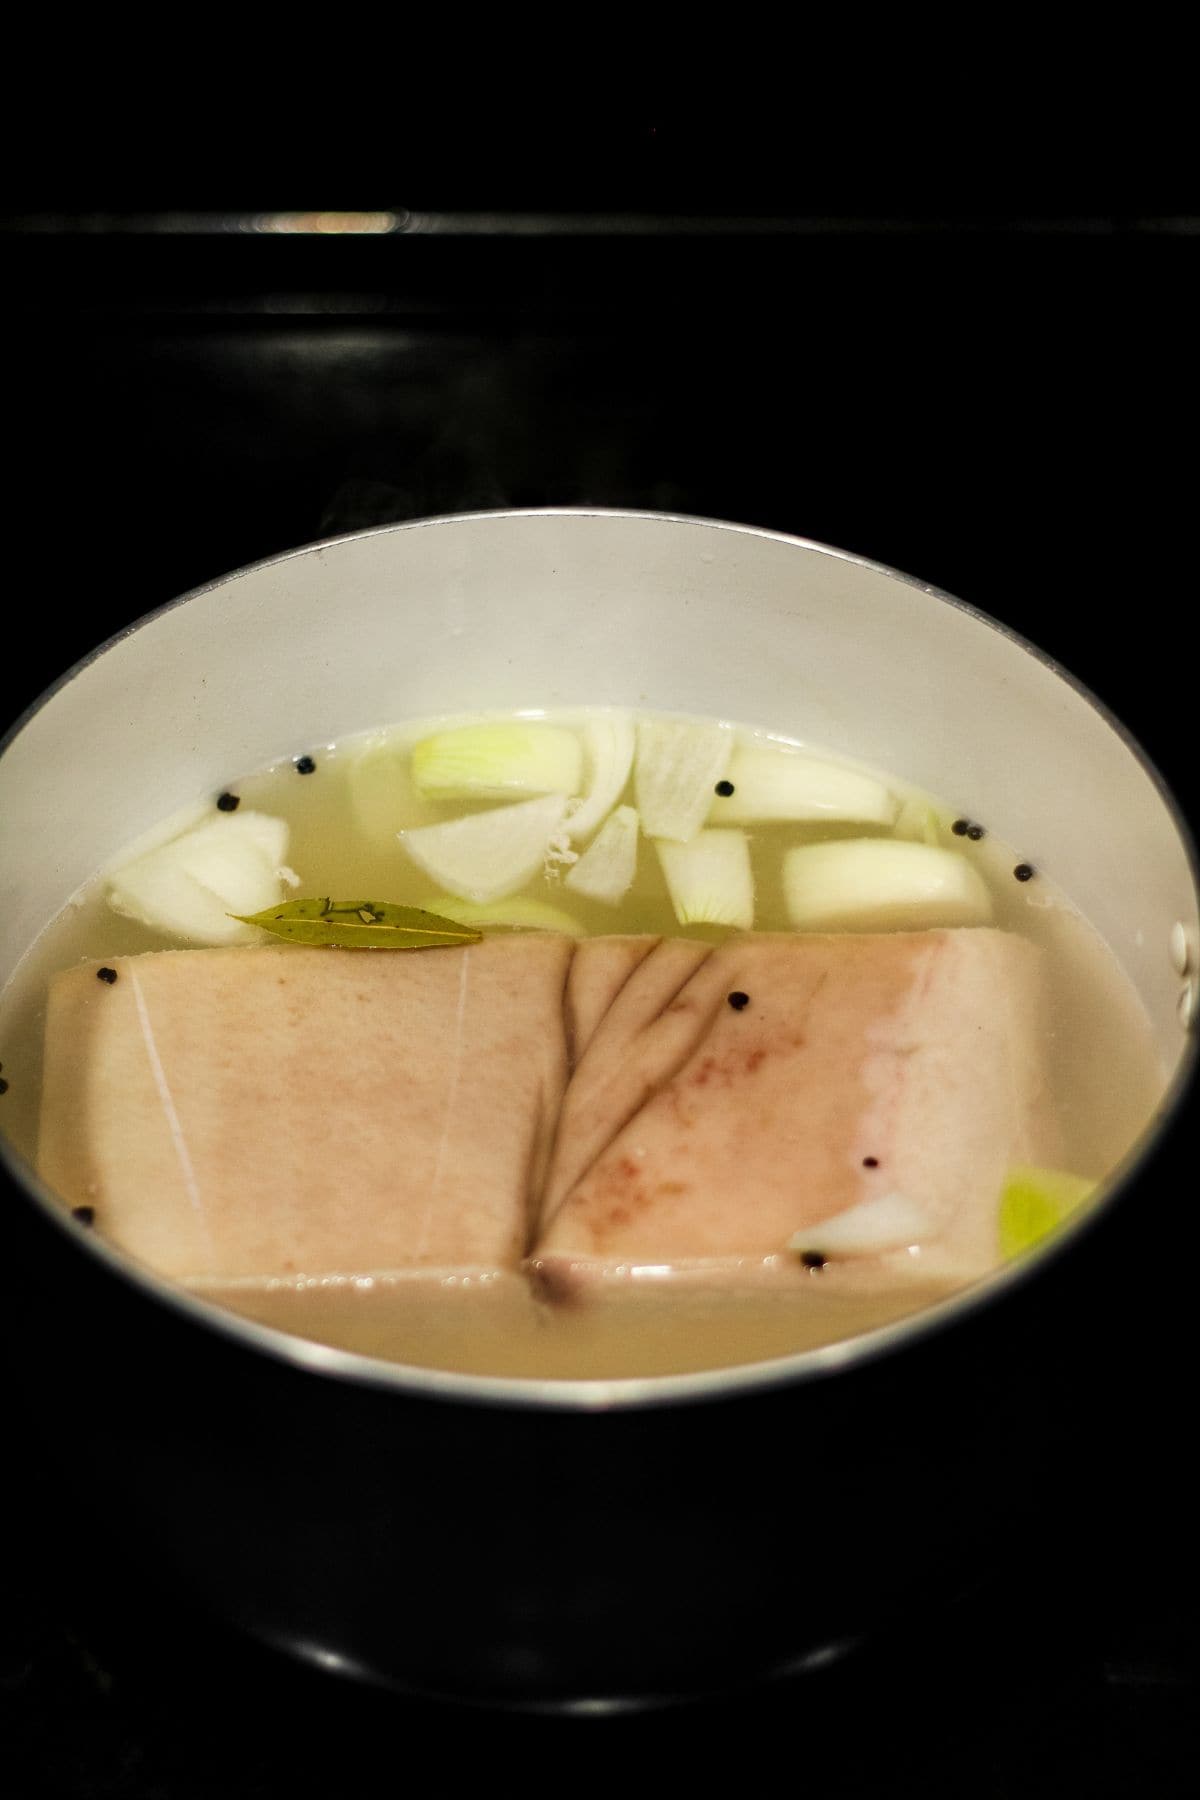 Pork belly in a pot with seasoning and spices.